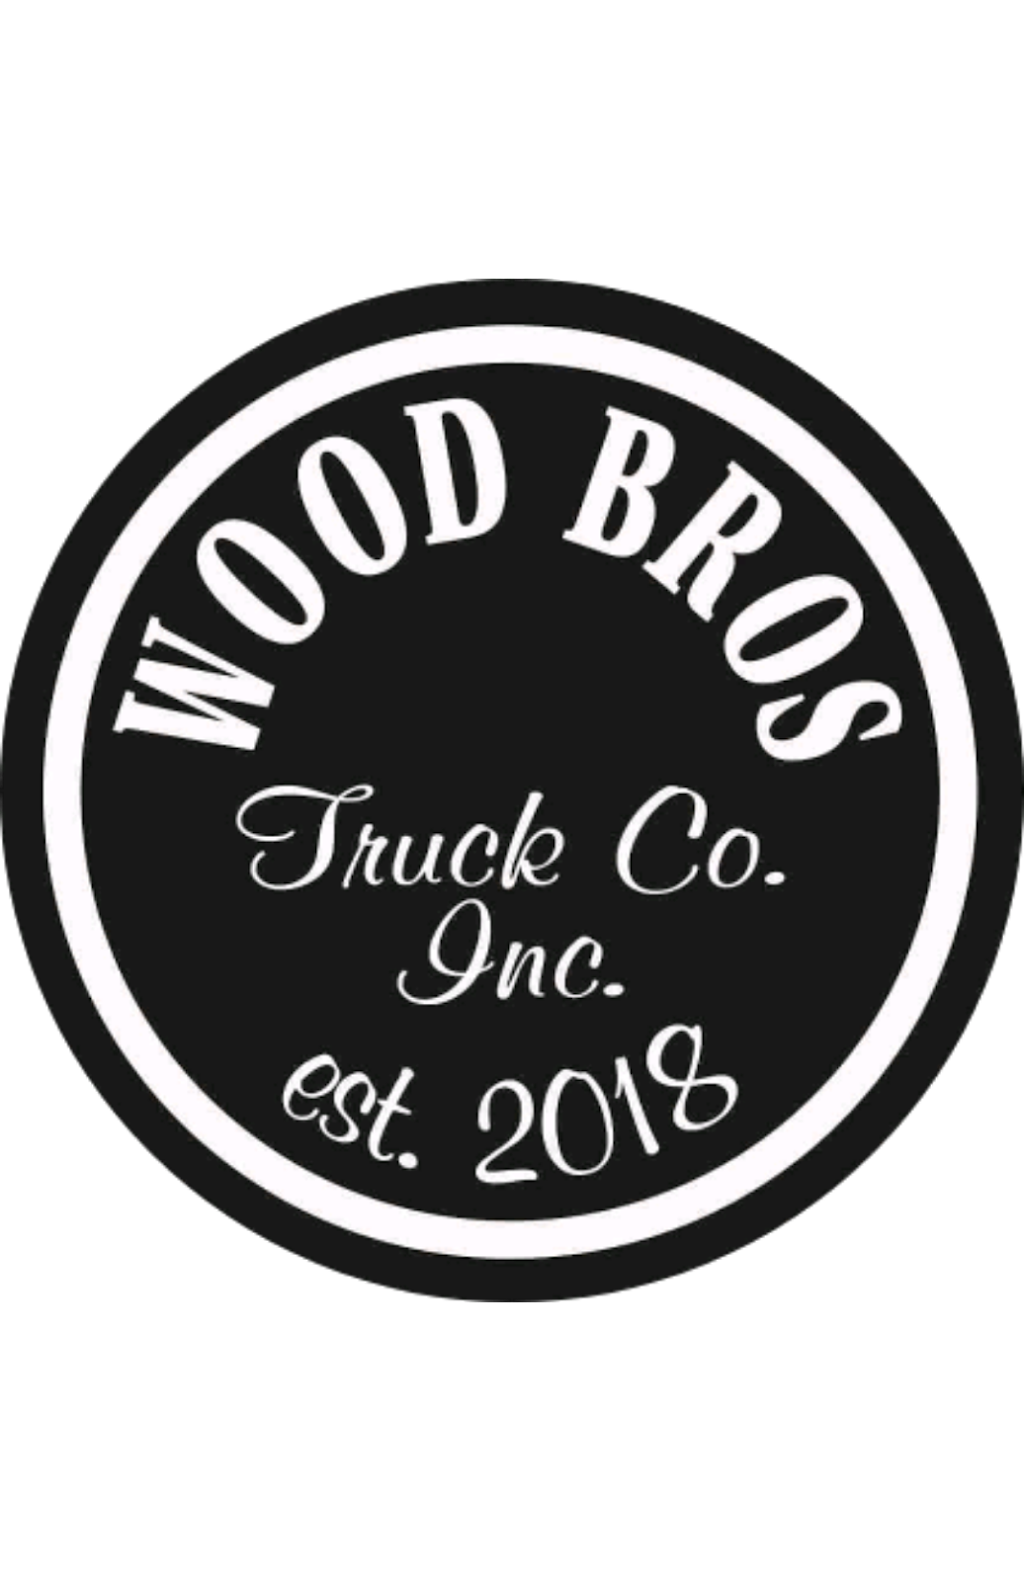 Wood Bros Truck Co. | 1800 49 Ave, Red Deer, AB T4R 2N7, Canada | Phone: (403) 342-7989